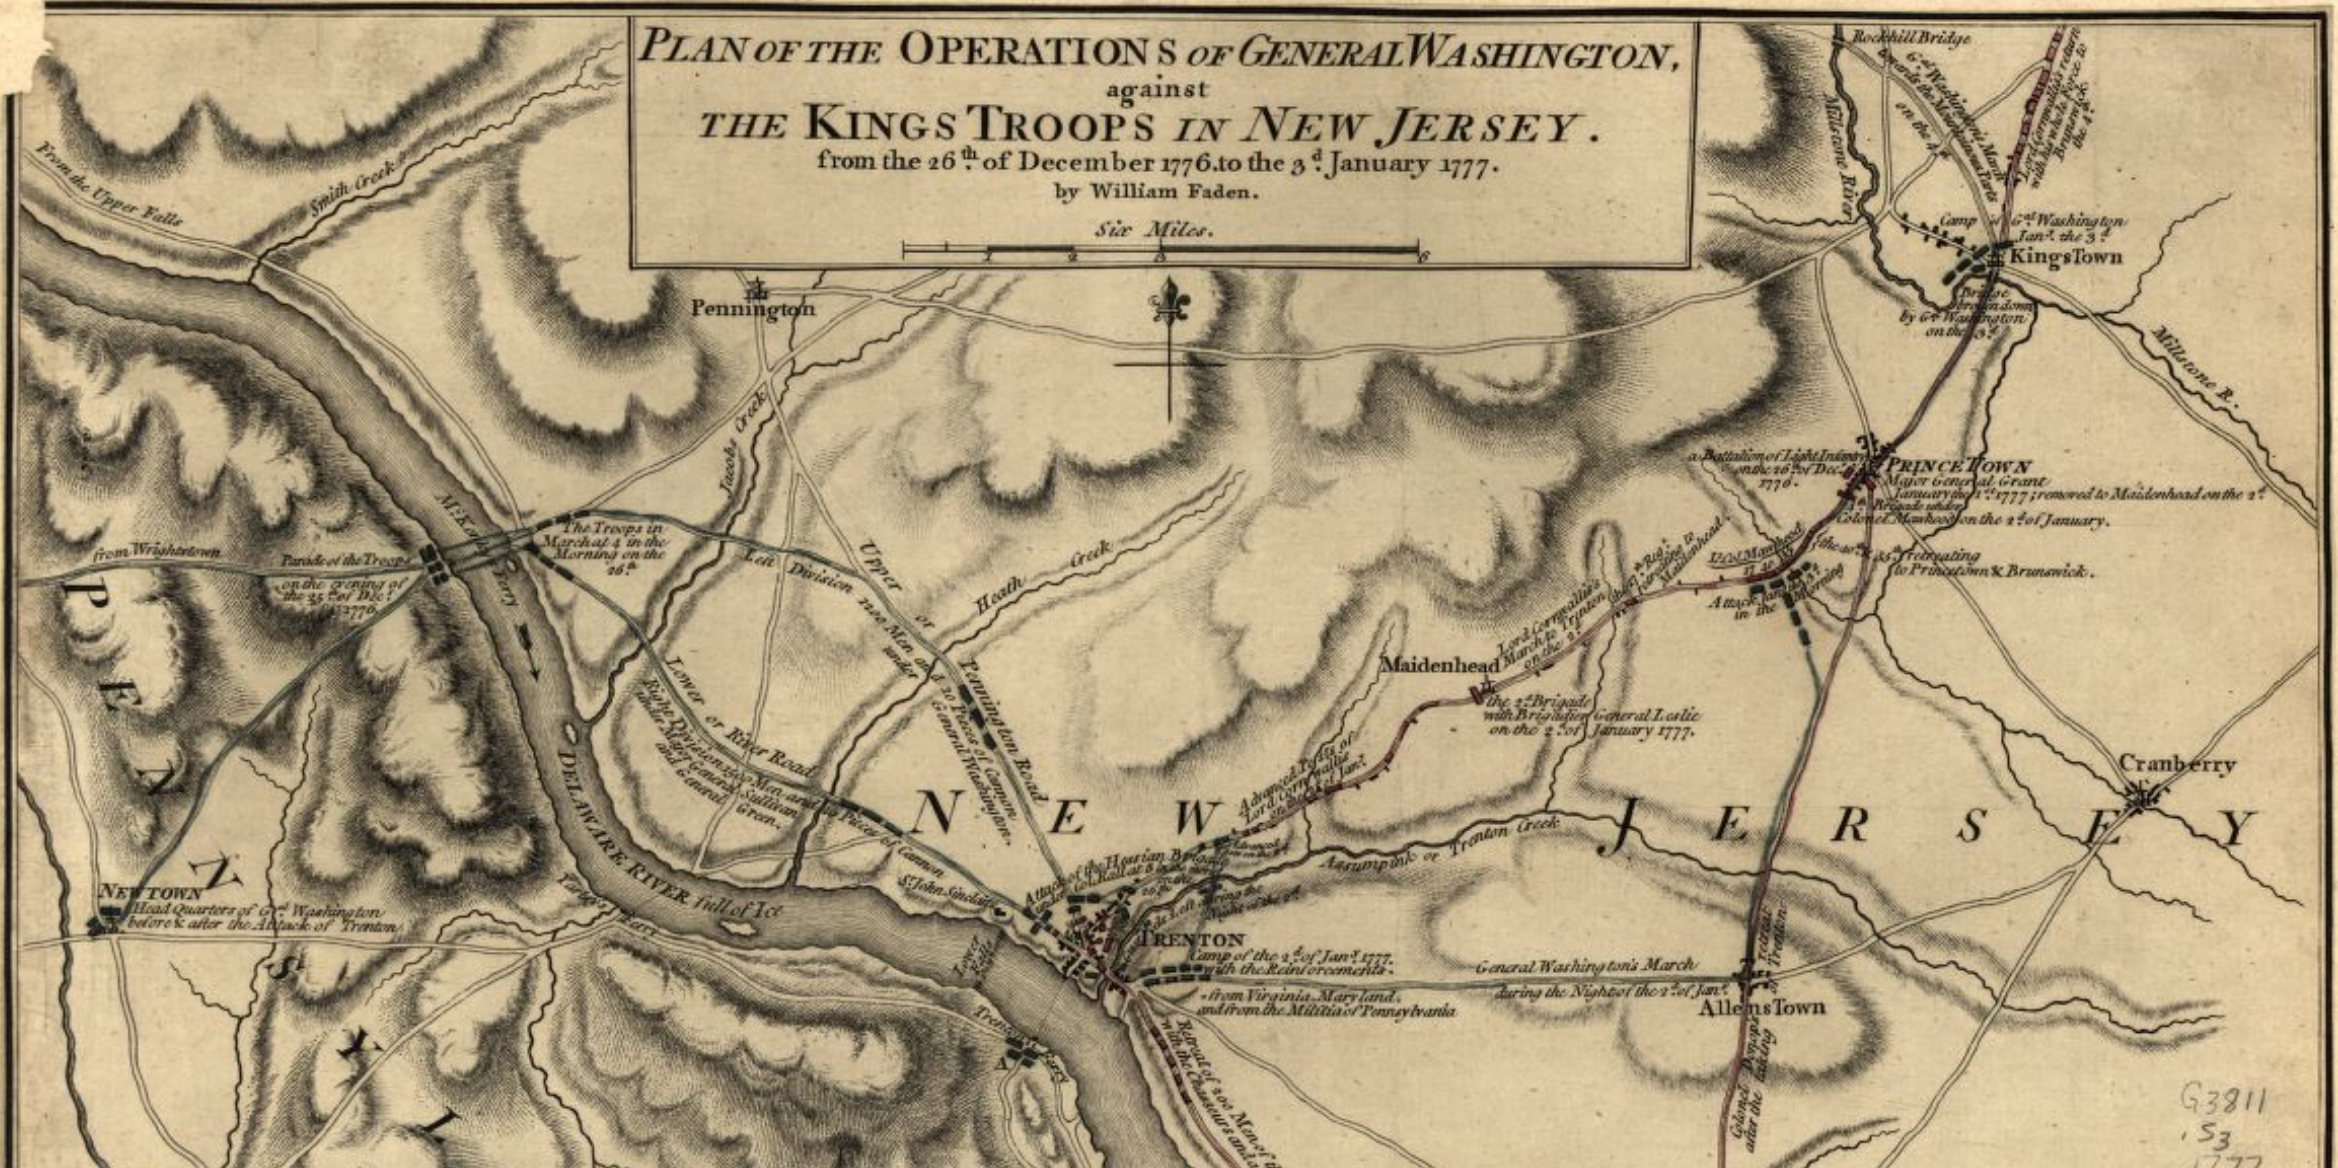 1 Plan of the Operations of General Washington, against the King's Troops in New Jersey by William Faden, 1777.